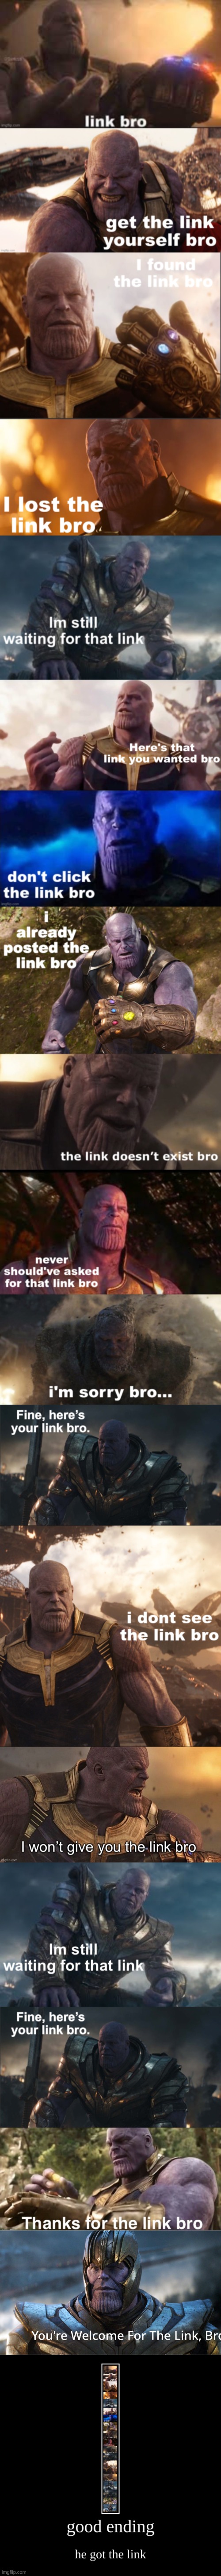 You guys asked for it : link bro (good ending) | image tagged in memes,funny,thanos,link bro,demotivationals,front page plz | made w/ Imgflip meme maker